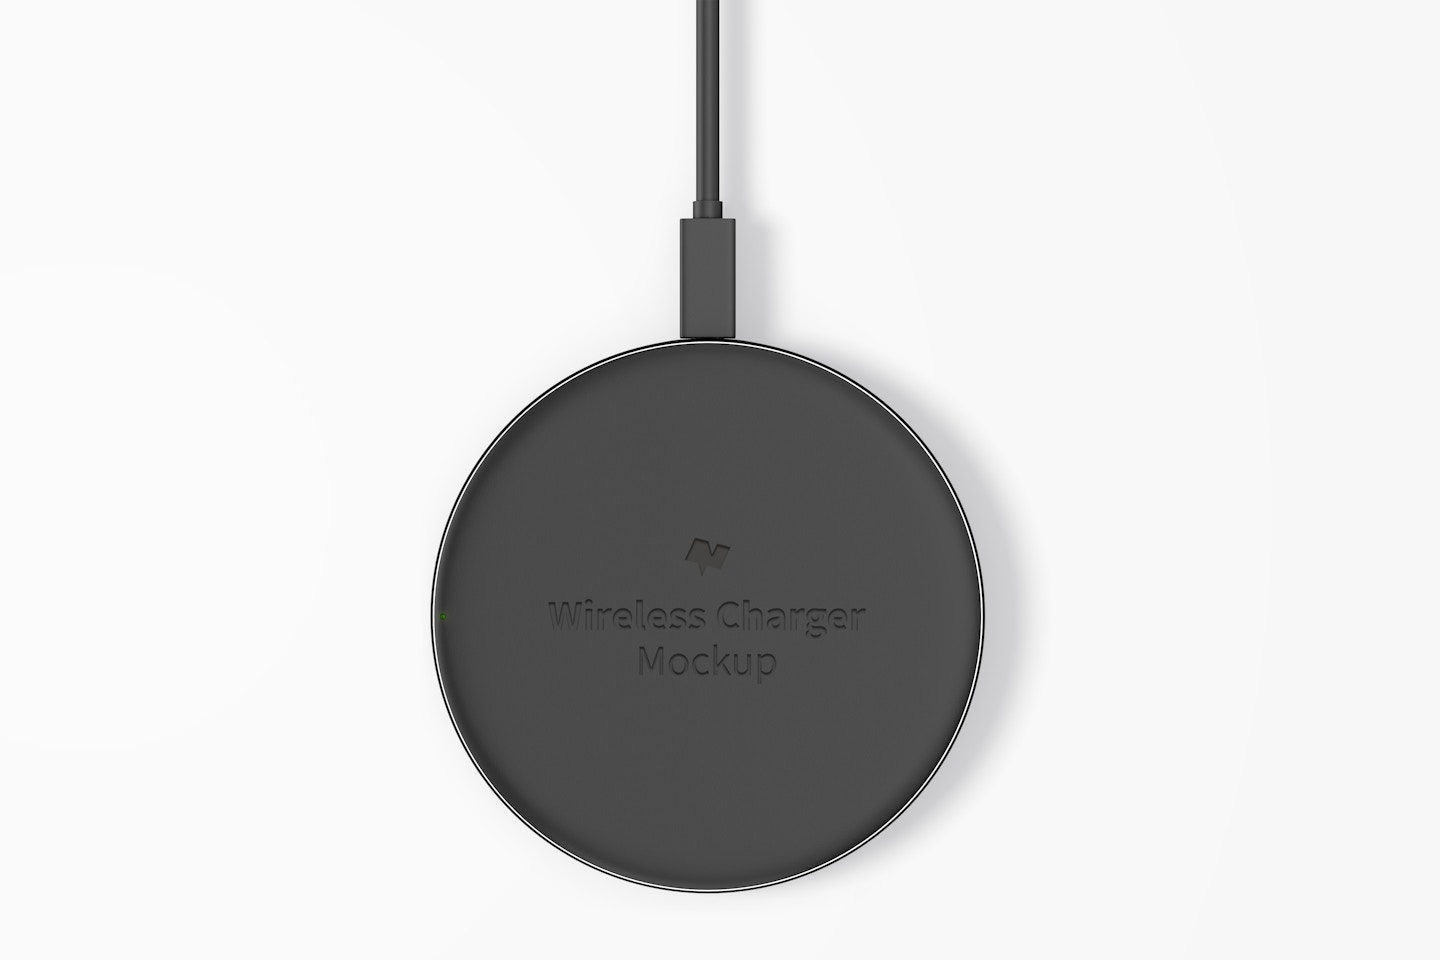 Wireless Charger Mockup, Top View